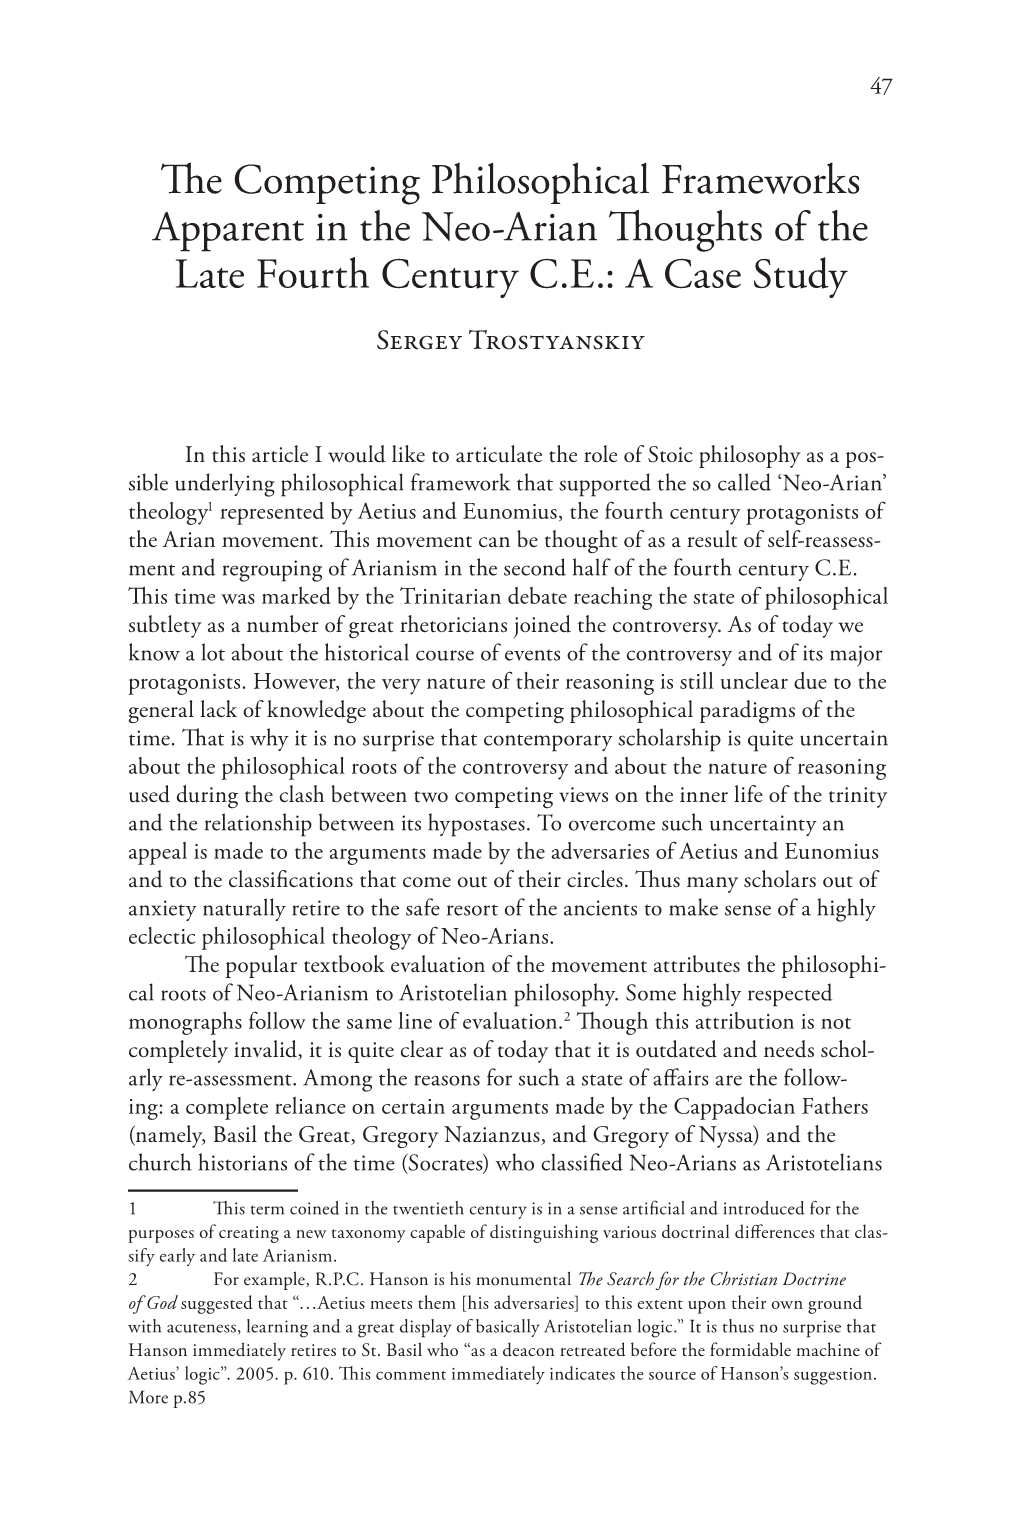 The Competing Philosophical Frameworks Apparent in the Neo-Arian Thoughts of the Late Fourth Century C.E.: a Case Study Sergey Trostyanskiy